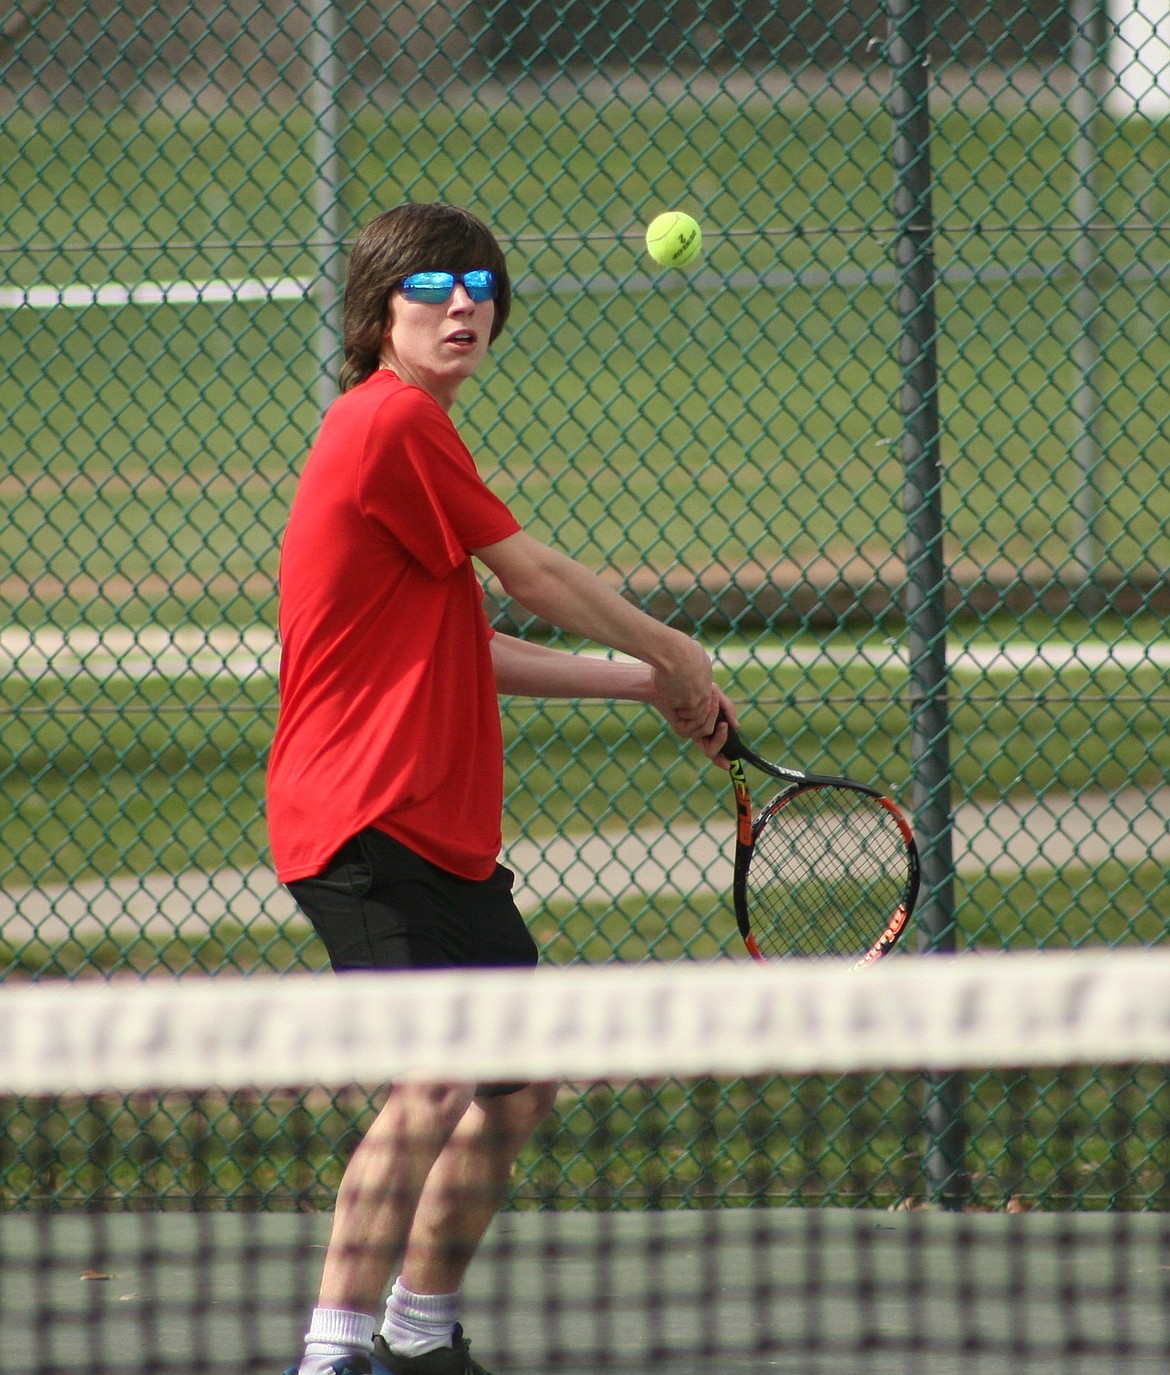 (Photo by ERIC PLUMMER)
Shane Curtis scored a win at No. 2 boys singles with consistency and deep ground strokes.